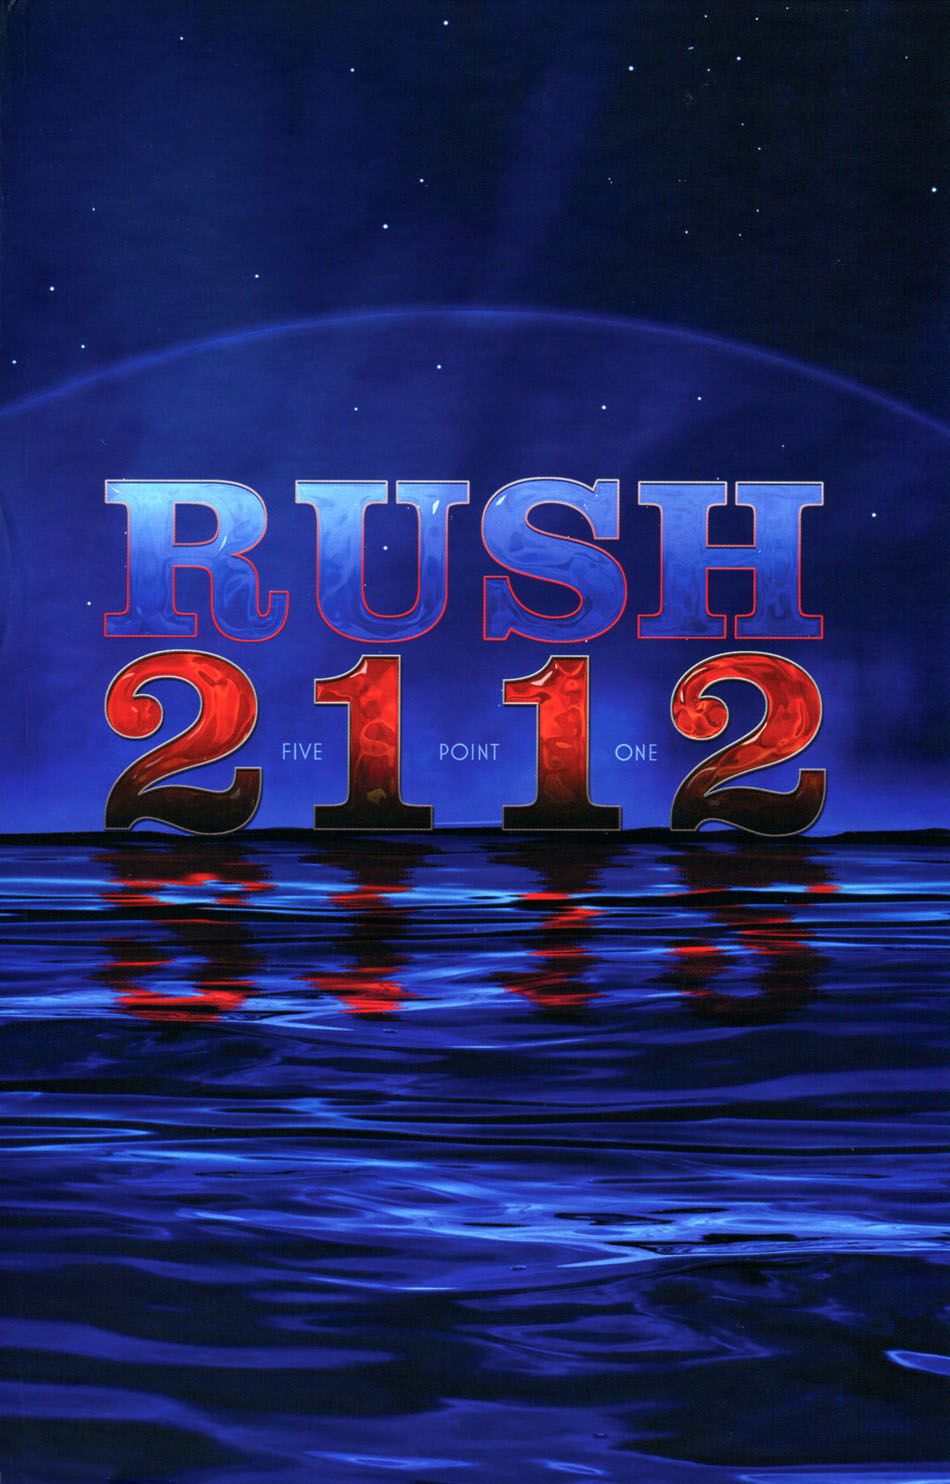 Rush 2112 Deluxe Edition